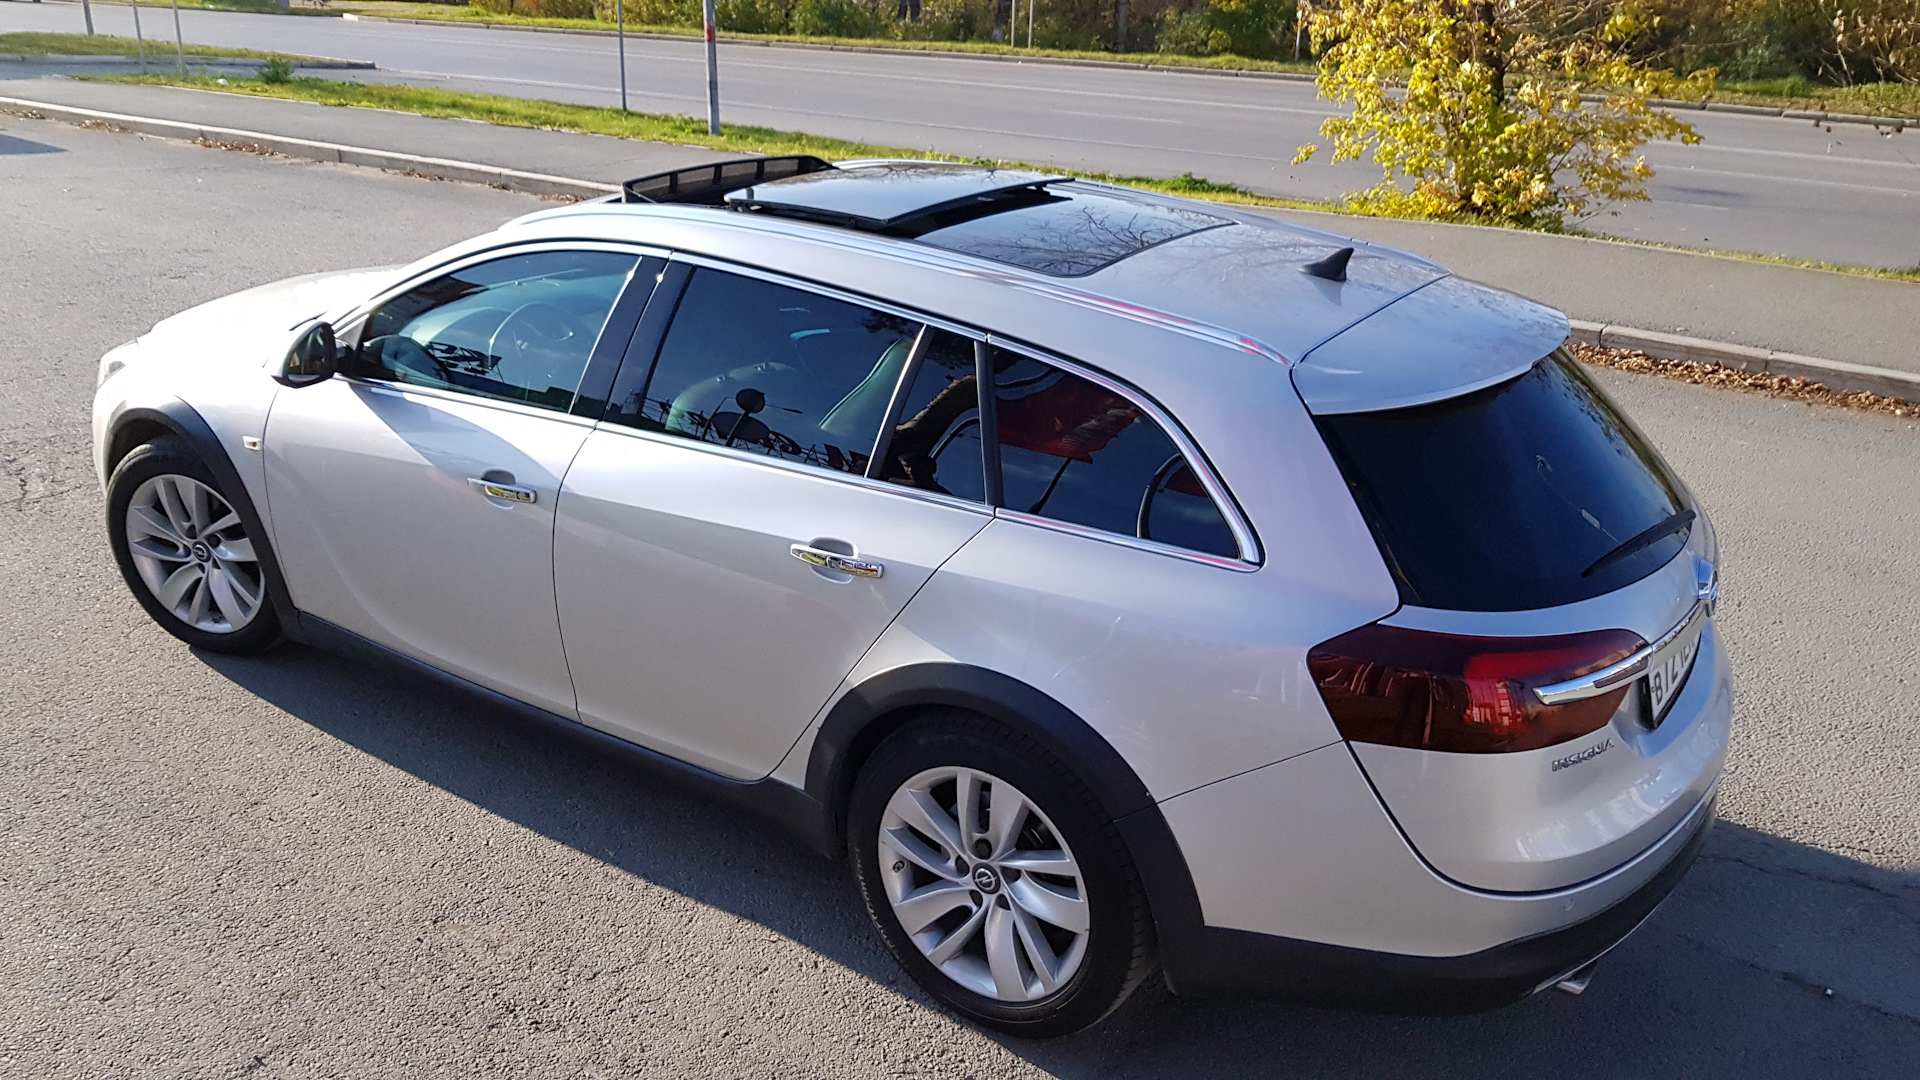 Country touring. Opel Insignia Country Tourer. Opel Insignia Country Tourer 2015. Opel Insignia Country Tourer 2014. Opel Insignia Country Tourer 2g.